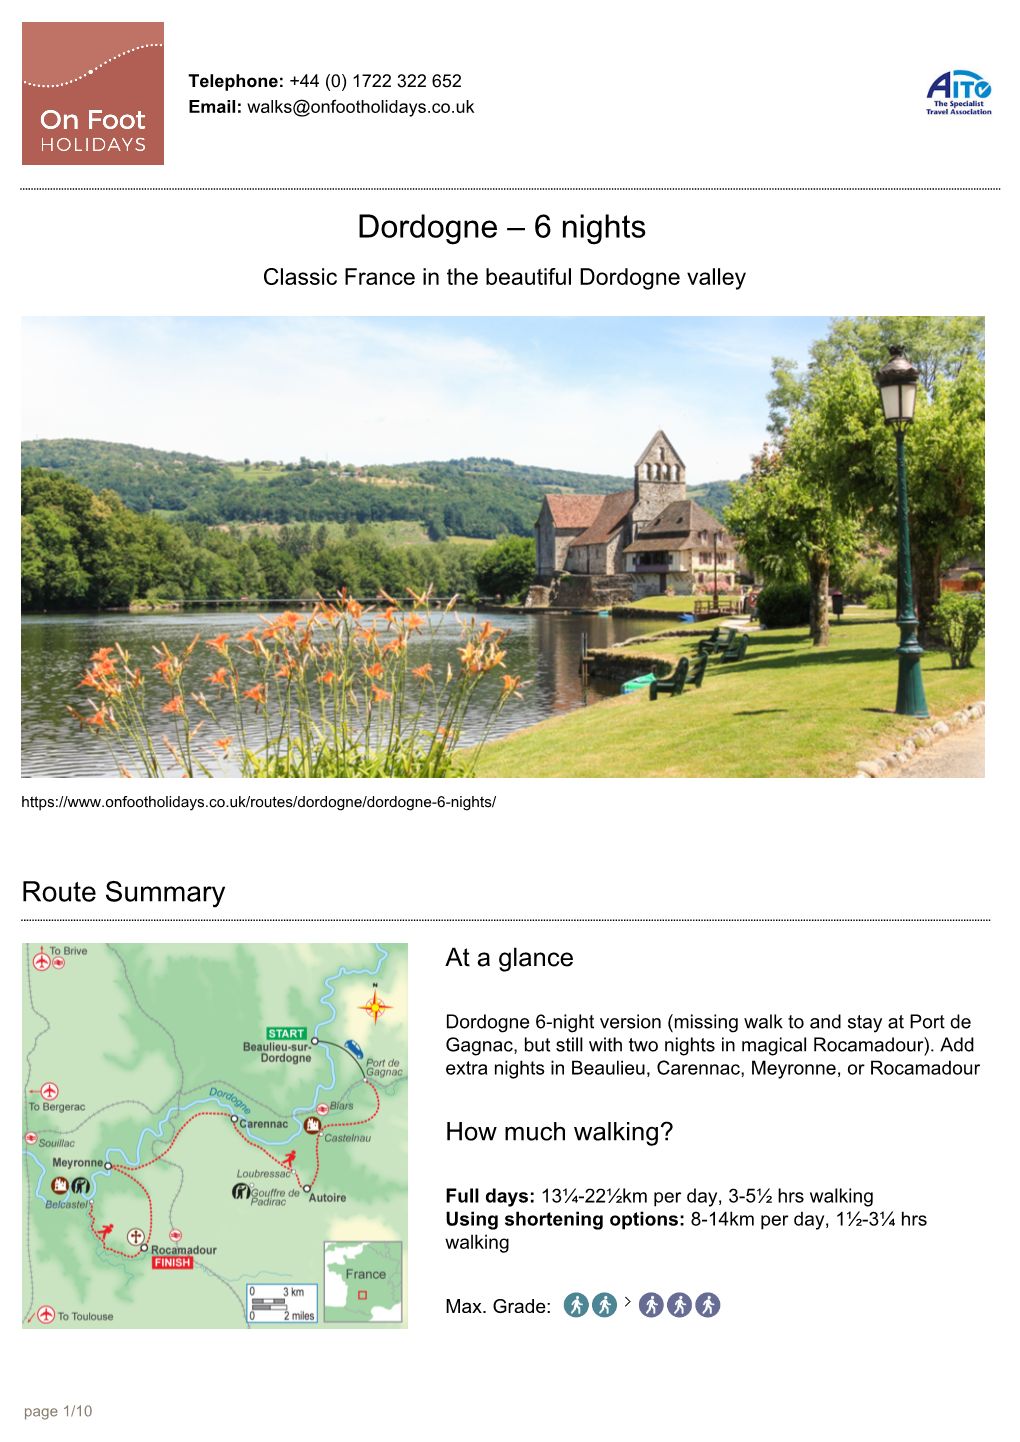 Dordogne – 6 Nights Classic France in the Beautiful Dordogne Valley